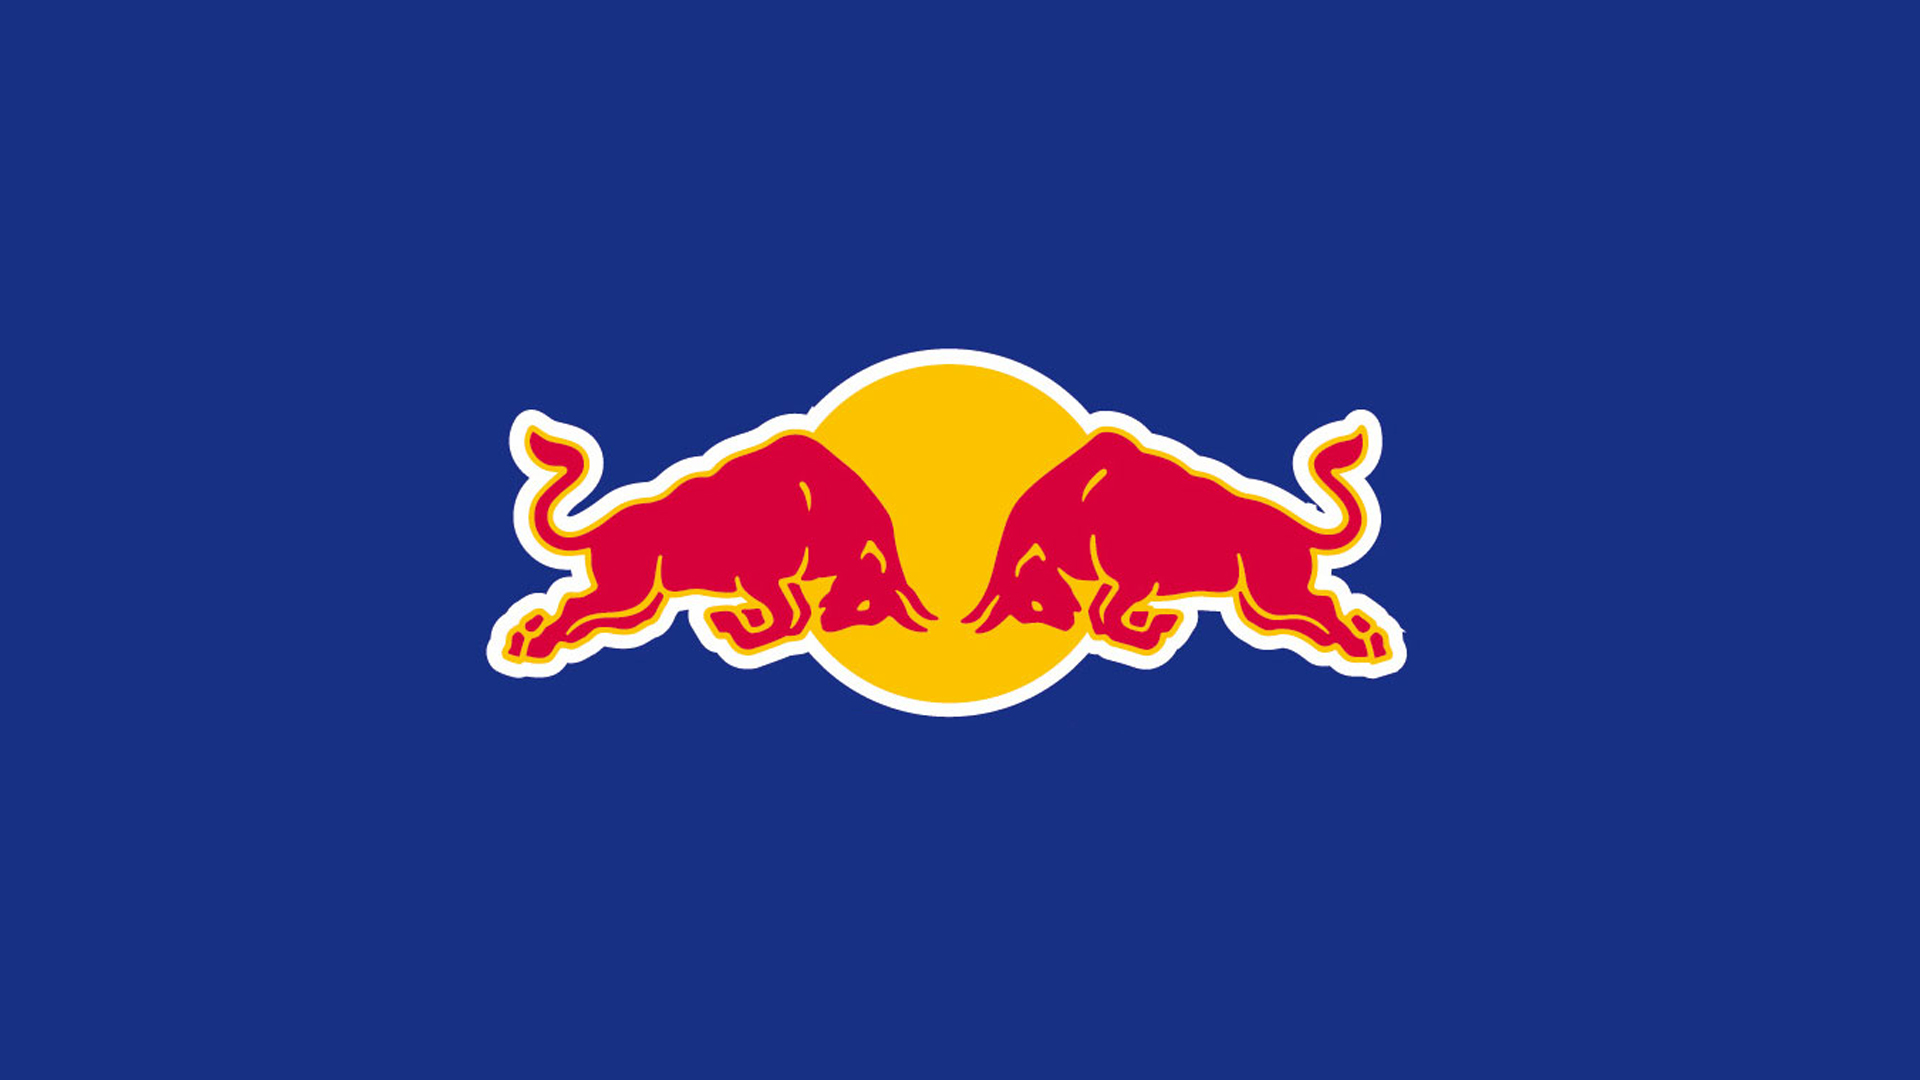 HD Redbull Wallpaper And Photos Others